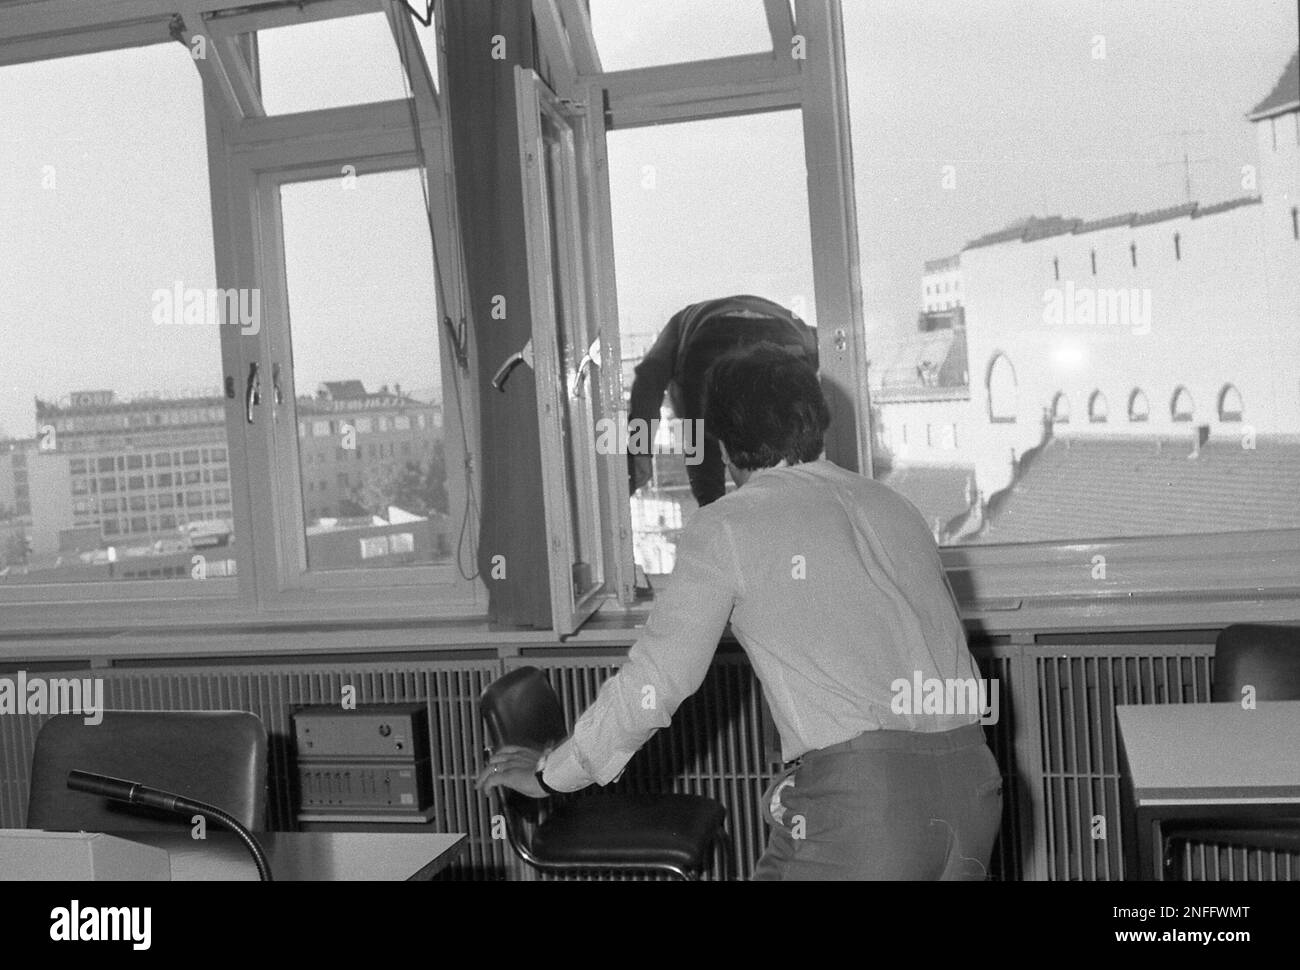 Turkish national Cemal Altun, 23, seeking political asylum in West Berlin, who suddenly got up from his chair is seen at the open window climbing standing on the sill at the opening of his asylum hearing in a court in West Berlin, West Germany, Tuesday August 30, 1983. Just a few seconds after this image was taken the young man jumped down from the sixth floor of the building committing suicide. EDS note: Image 9 of a set of 16. (AP Photo/Elke Bruhn-Hoffmann) Stock Photo